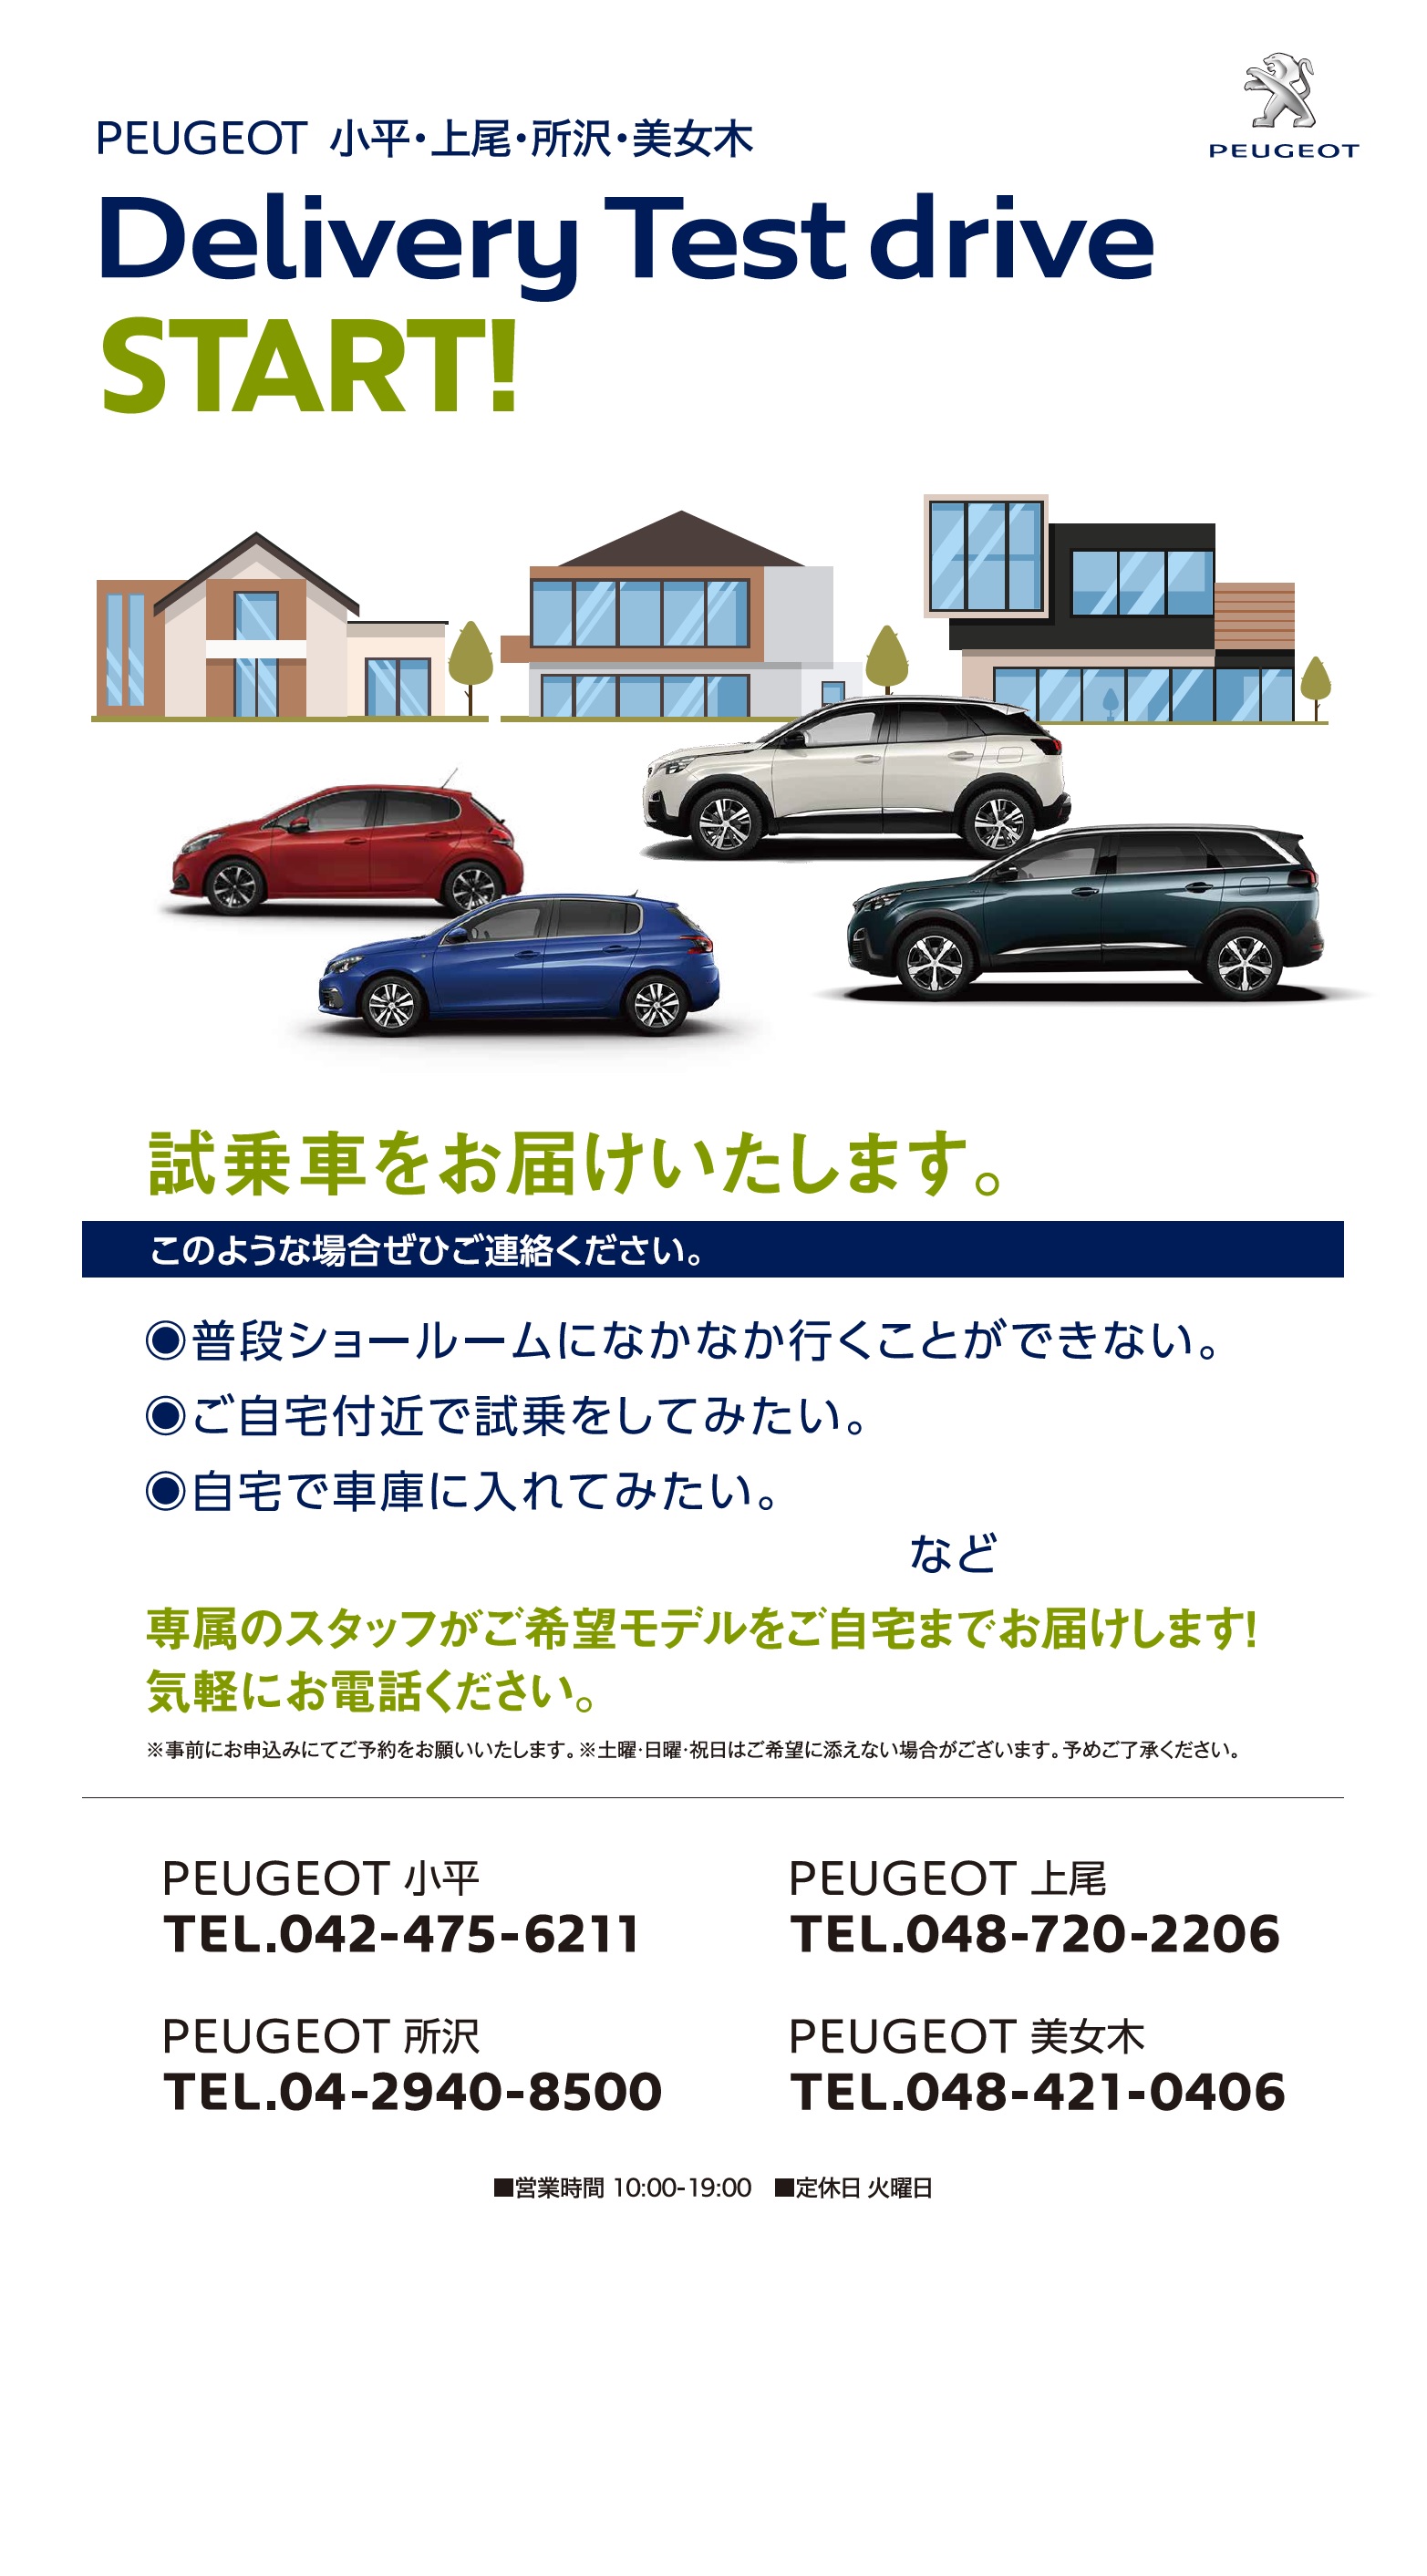 Delivery Tesut drive　ご好評につき継続実施中！！